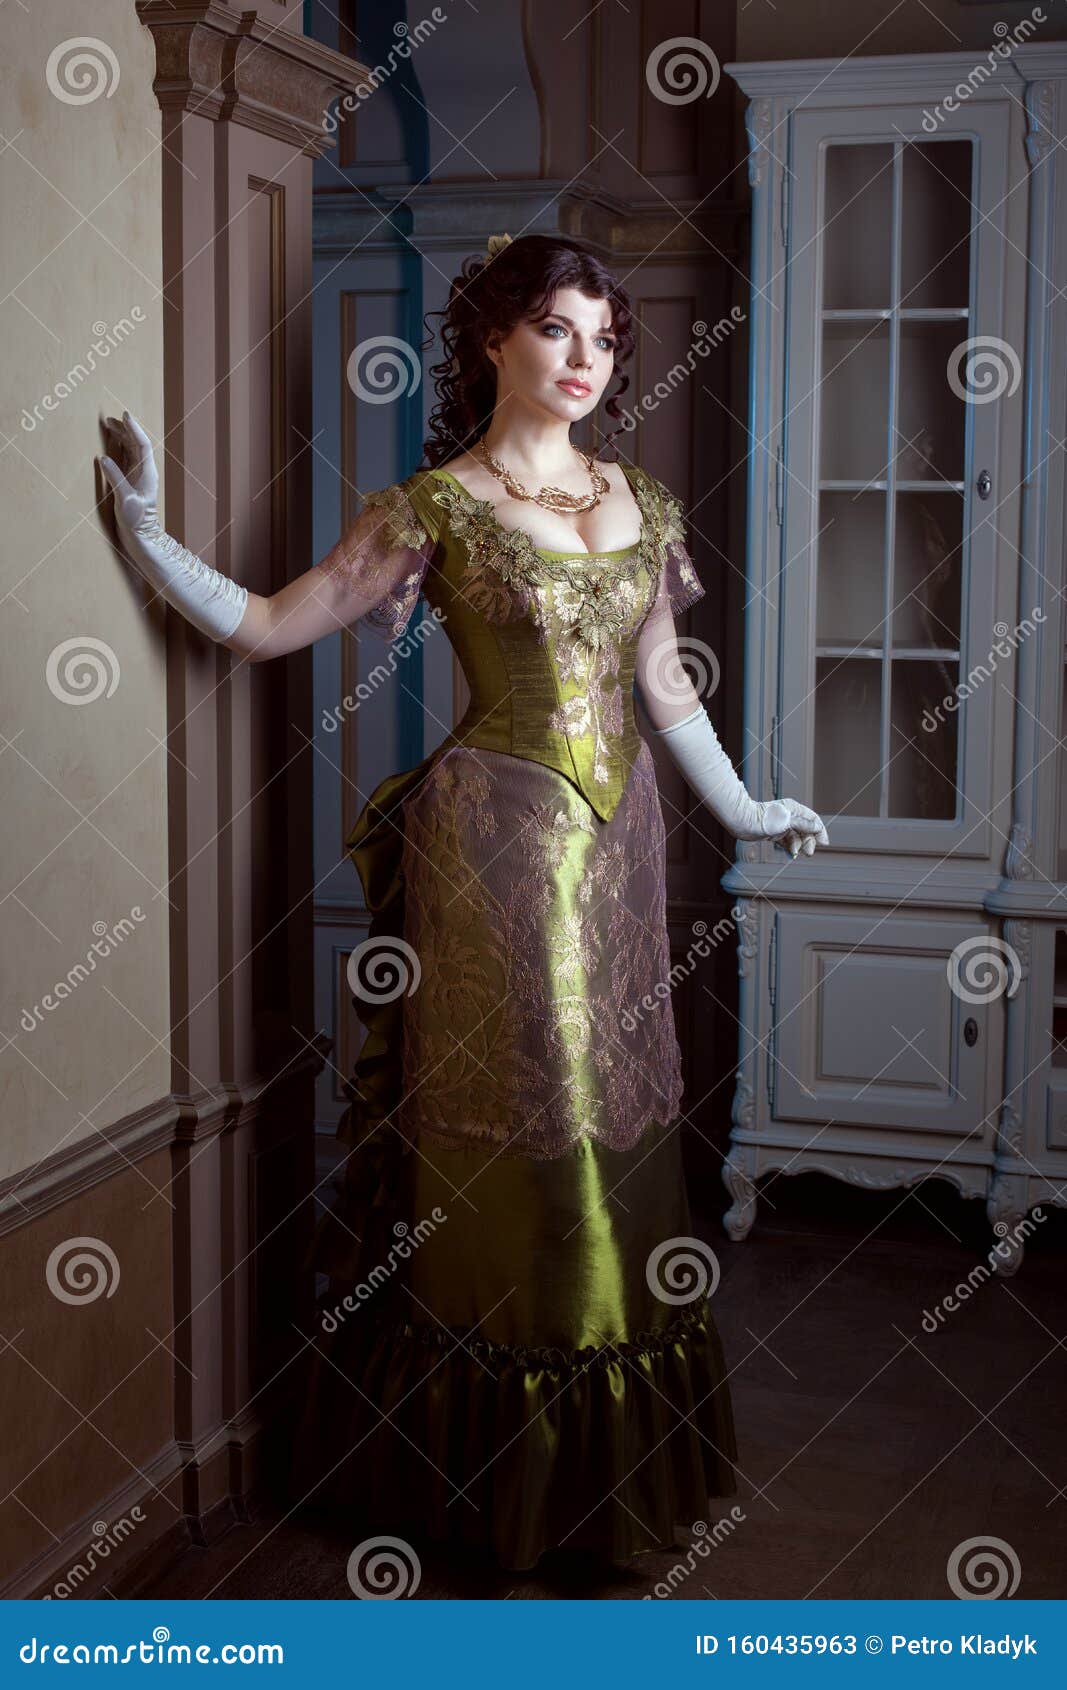 Elegant Woman in a Magnificent Dress Stock Image - Image of carnival ...